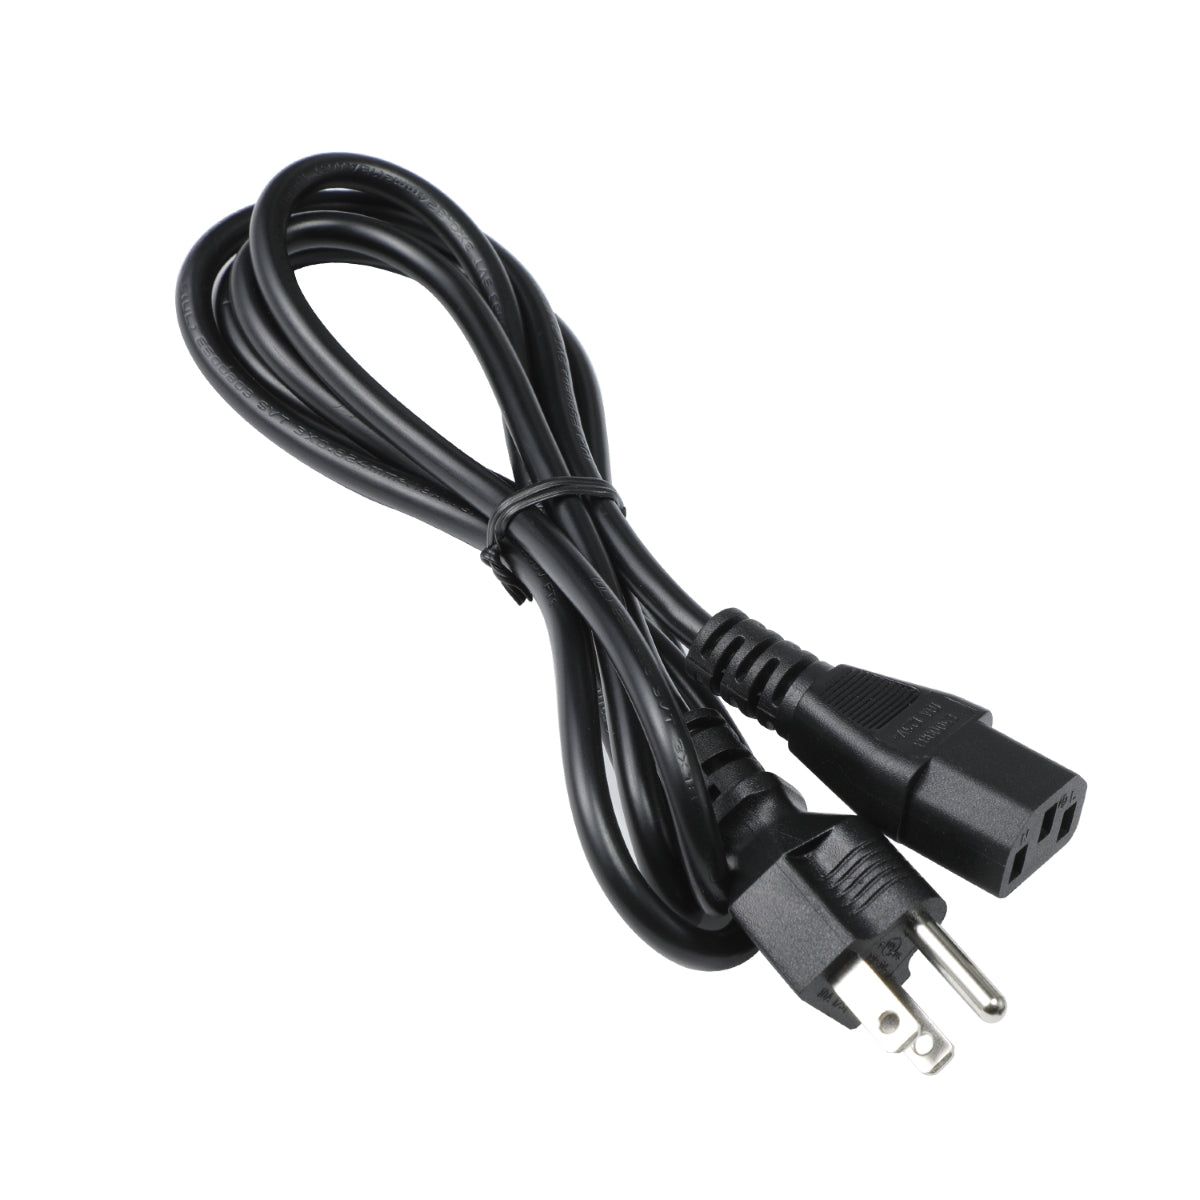 Power Cable for Philips 243B1 Monitor.